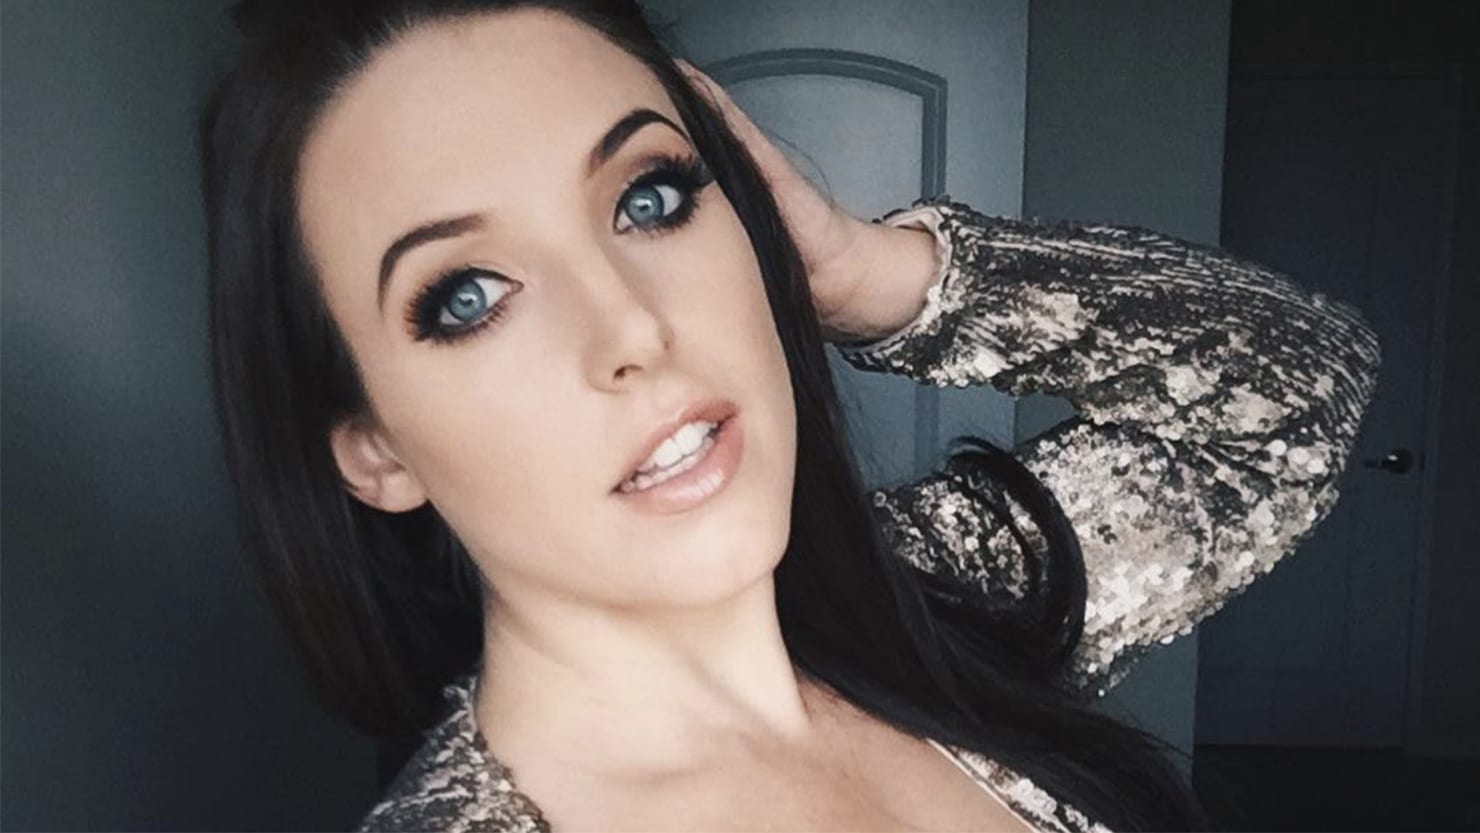 Angela White Make Me Tease - Meet the Porn Star Turned Academic Who's Revolutionizing the Adult Industry